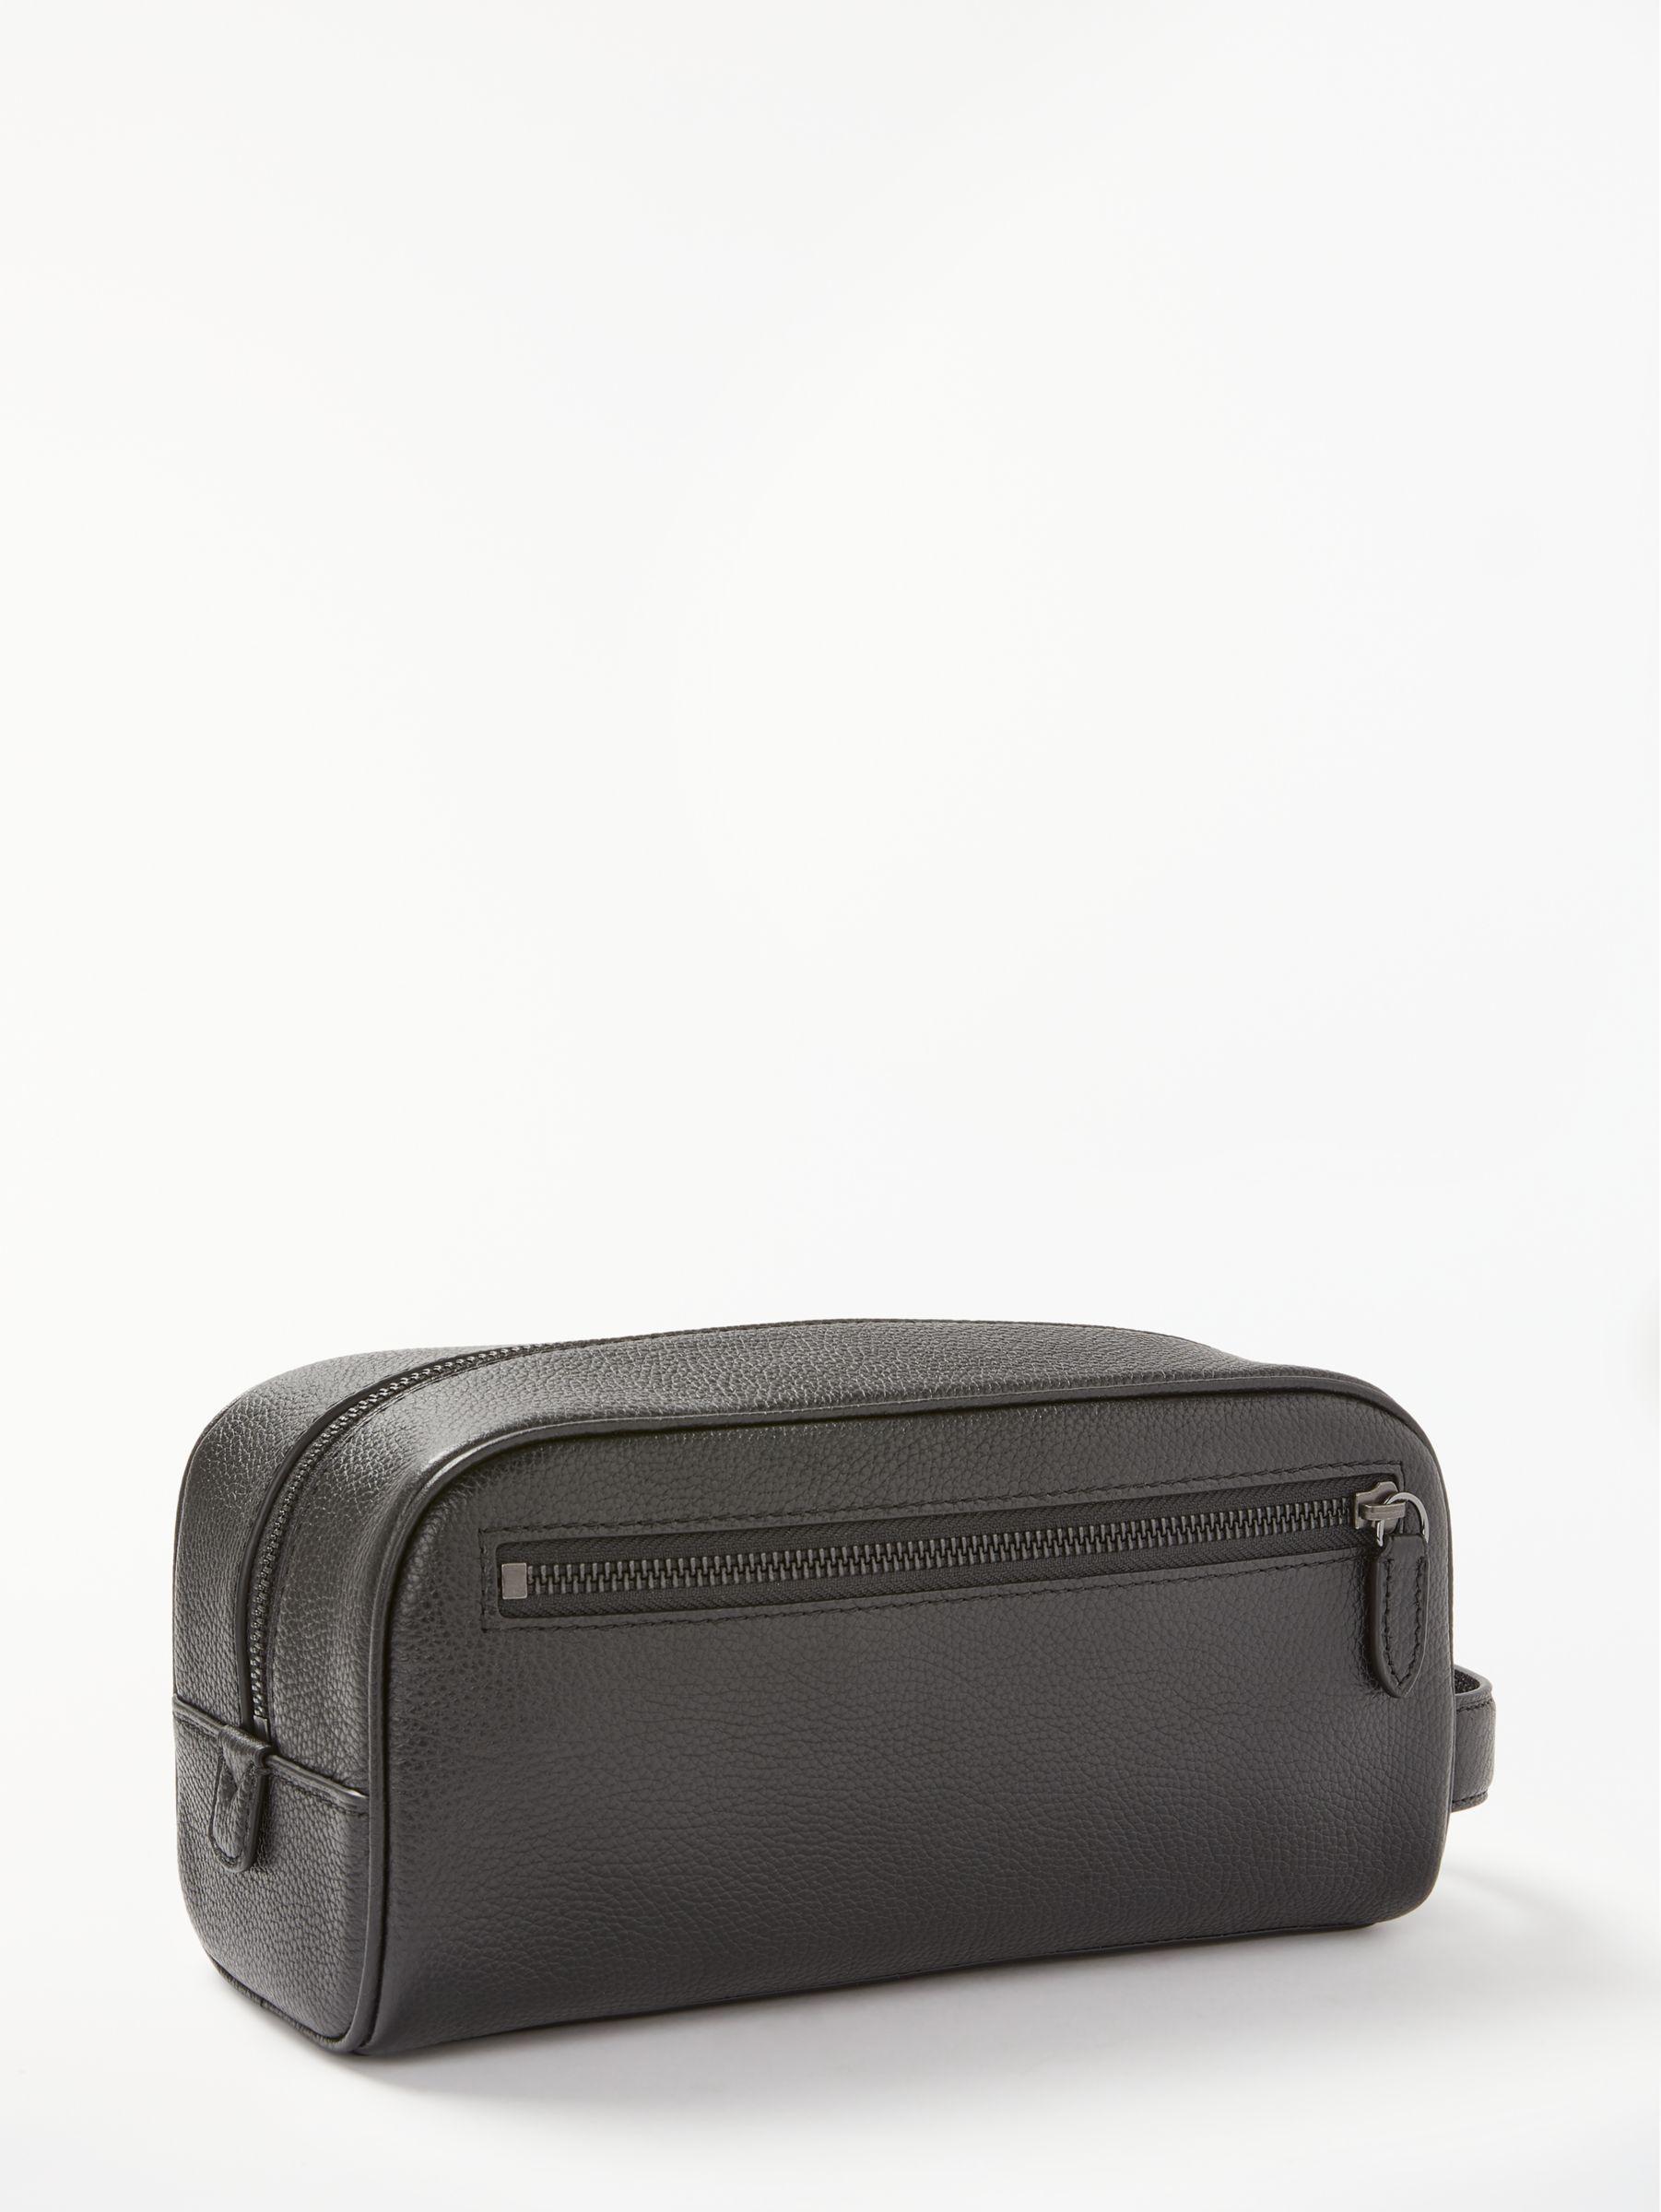 Ralph Lauren Polo Pebble Leather Wash Bag in Black for Men - Lyst